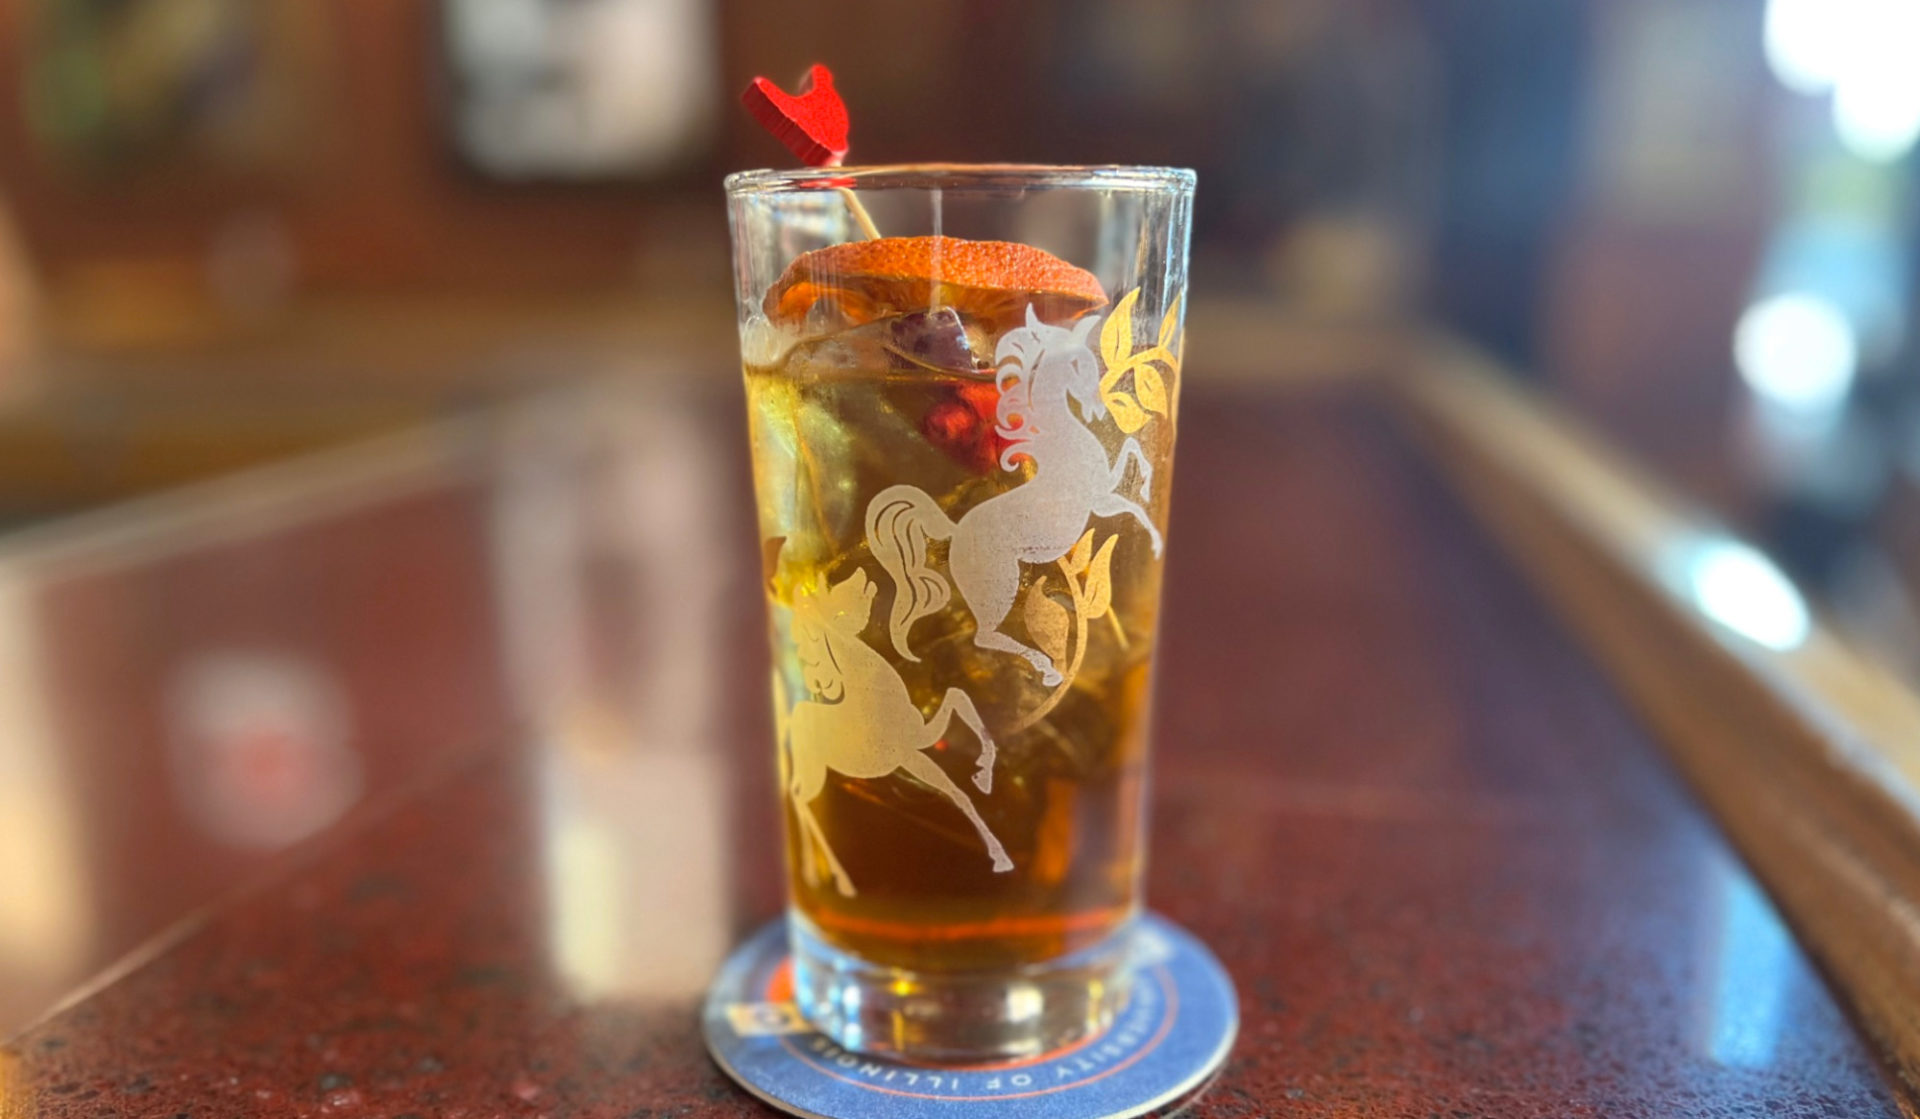 Watson's cocktail, a twist on a Vieux Carre drink in a glass etched with flying ponies, garnished with an orange and two rosebuds on a rooster toothpick.